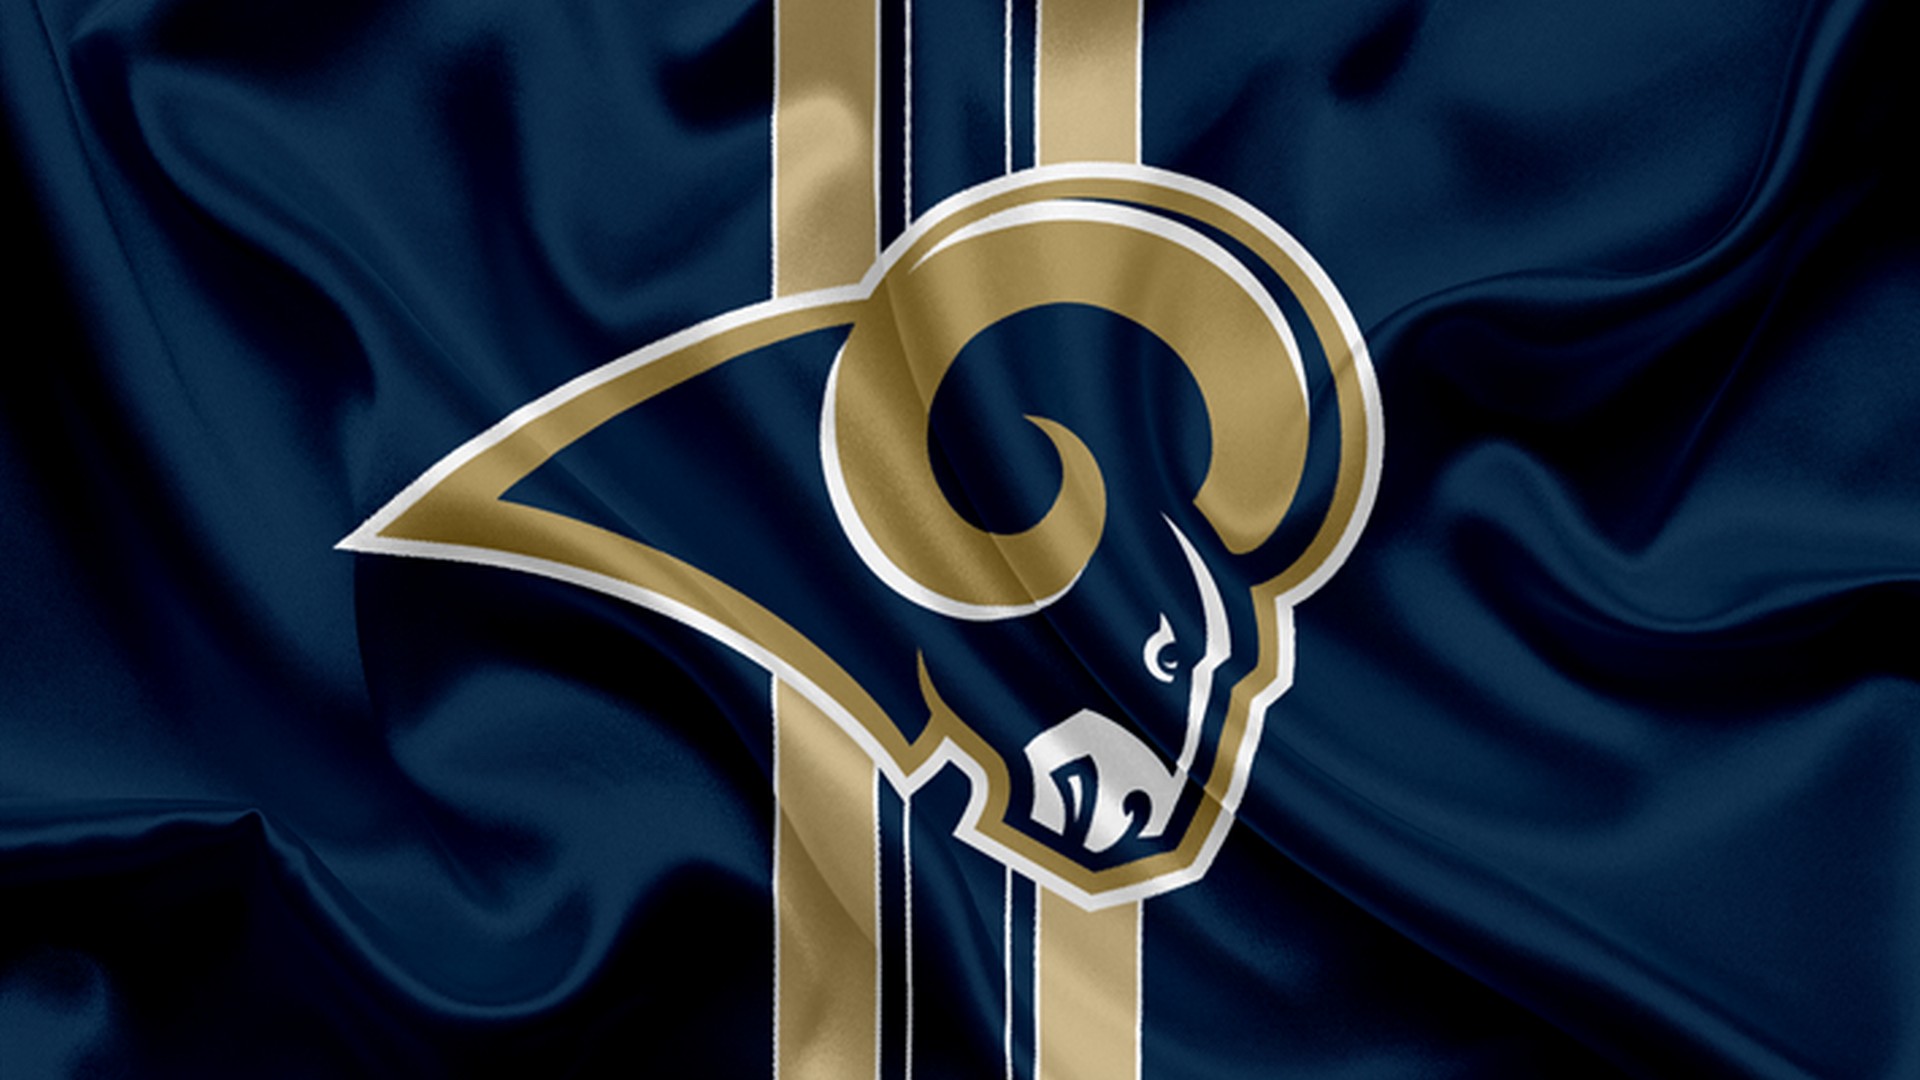 Los Angeles Rams Backgrounds HD With Resolution 1920X1080 pixel. You can make this wallpaper for your Mac or Windows Desktop Background, iPhone, Android or Tablet and another Smartphone device for free